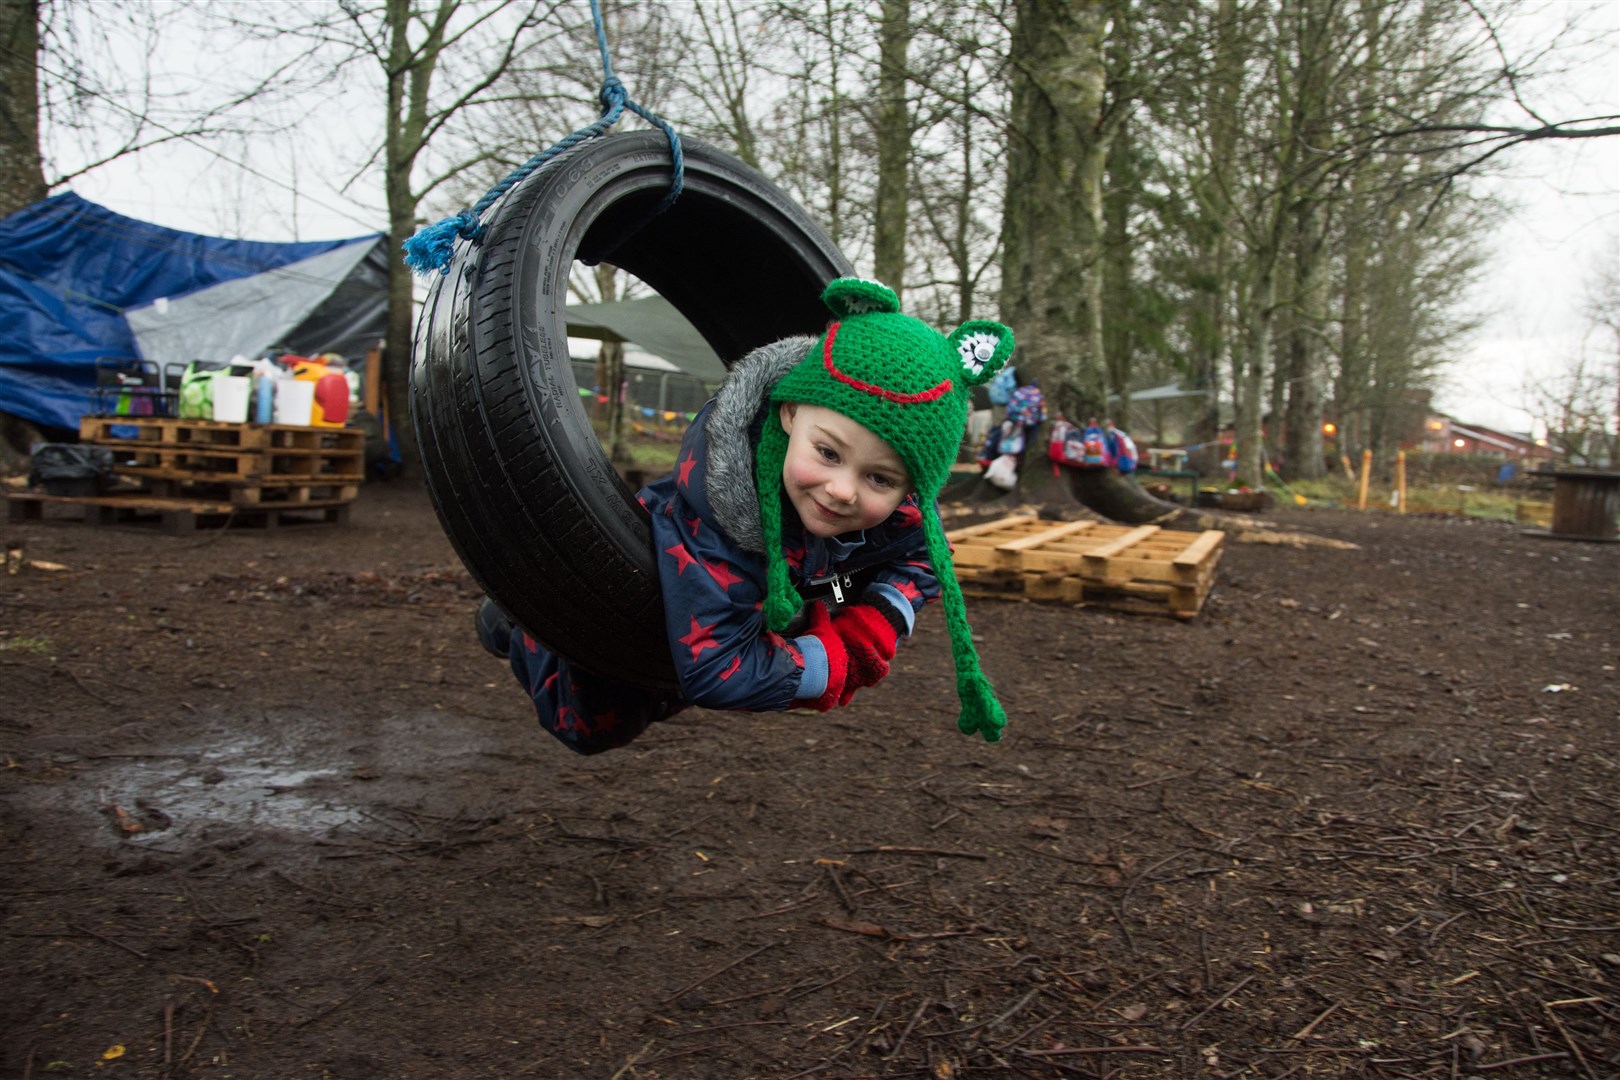 Oscar Wainwright on a swing at Liberty Kids' outdoor learning area in Elgin. Picture: Becky Saunderson.